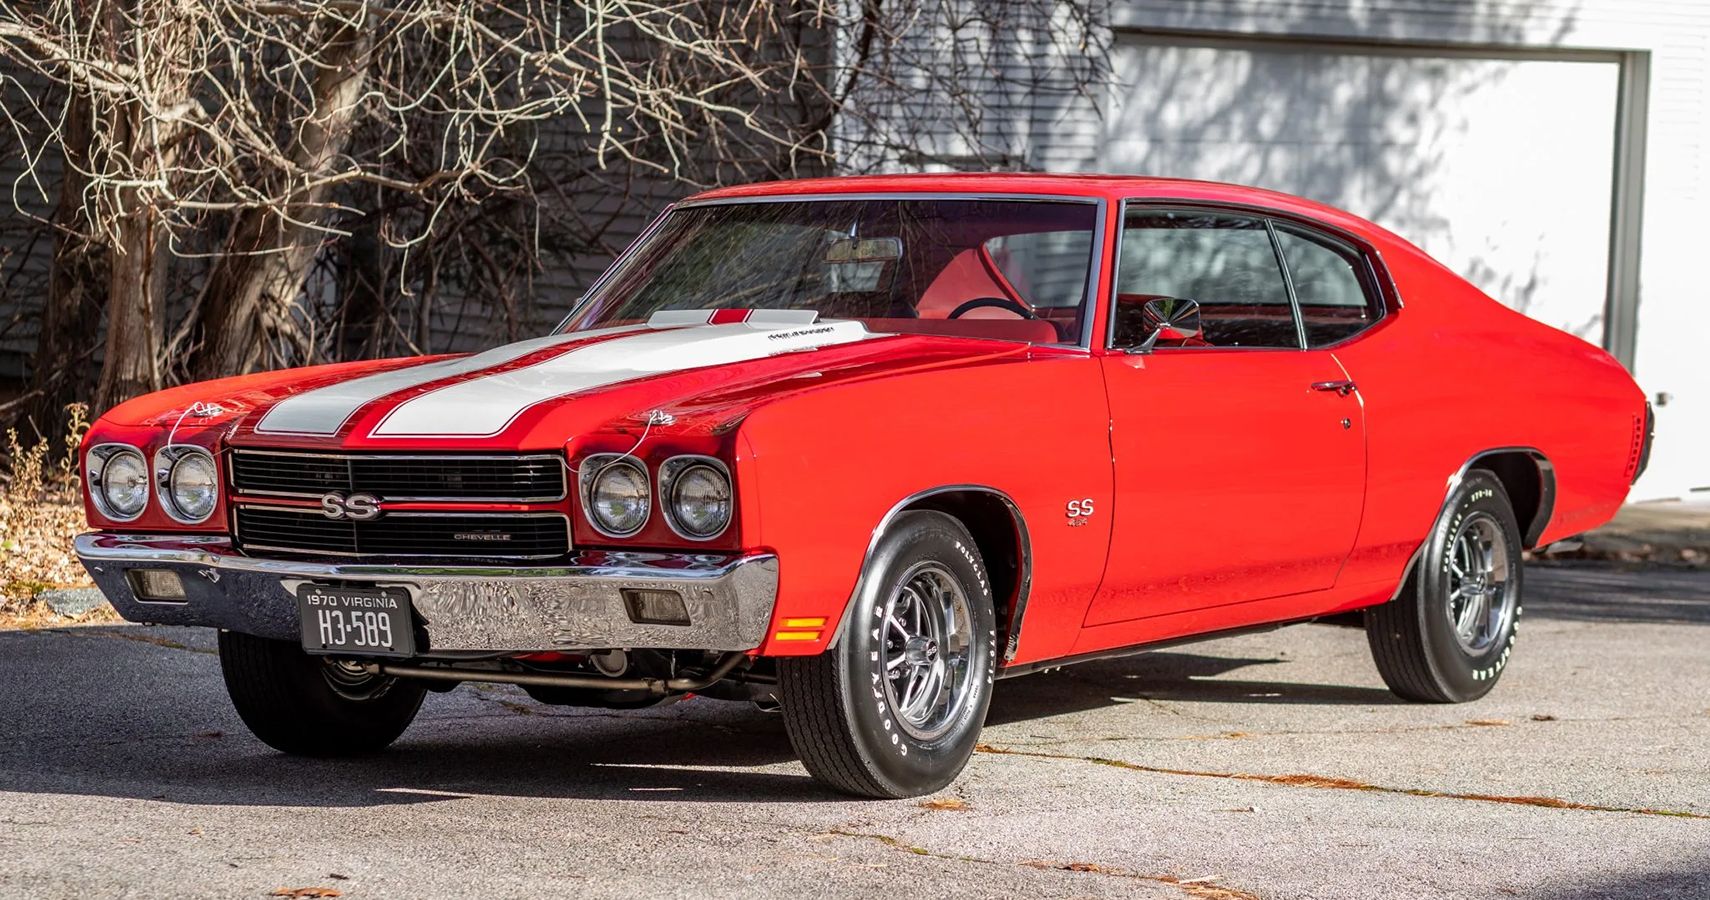 10 Legendary American Cars That Redefined Speed And Power